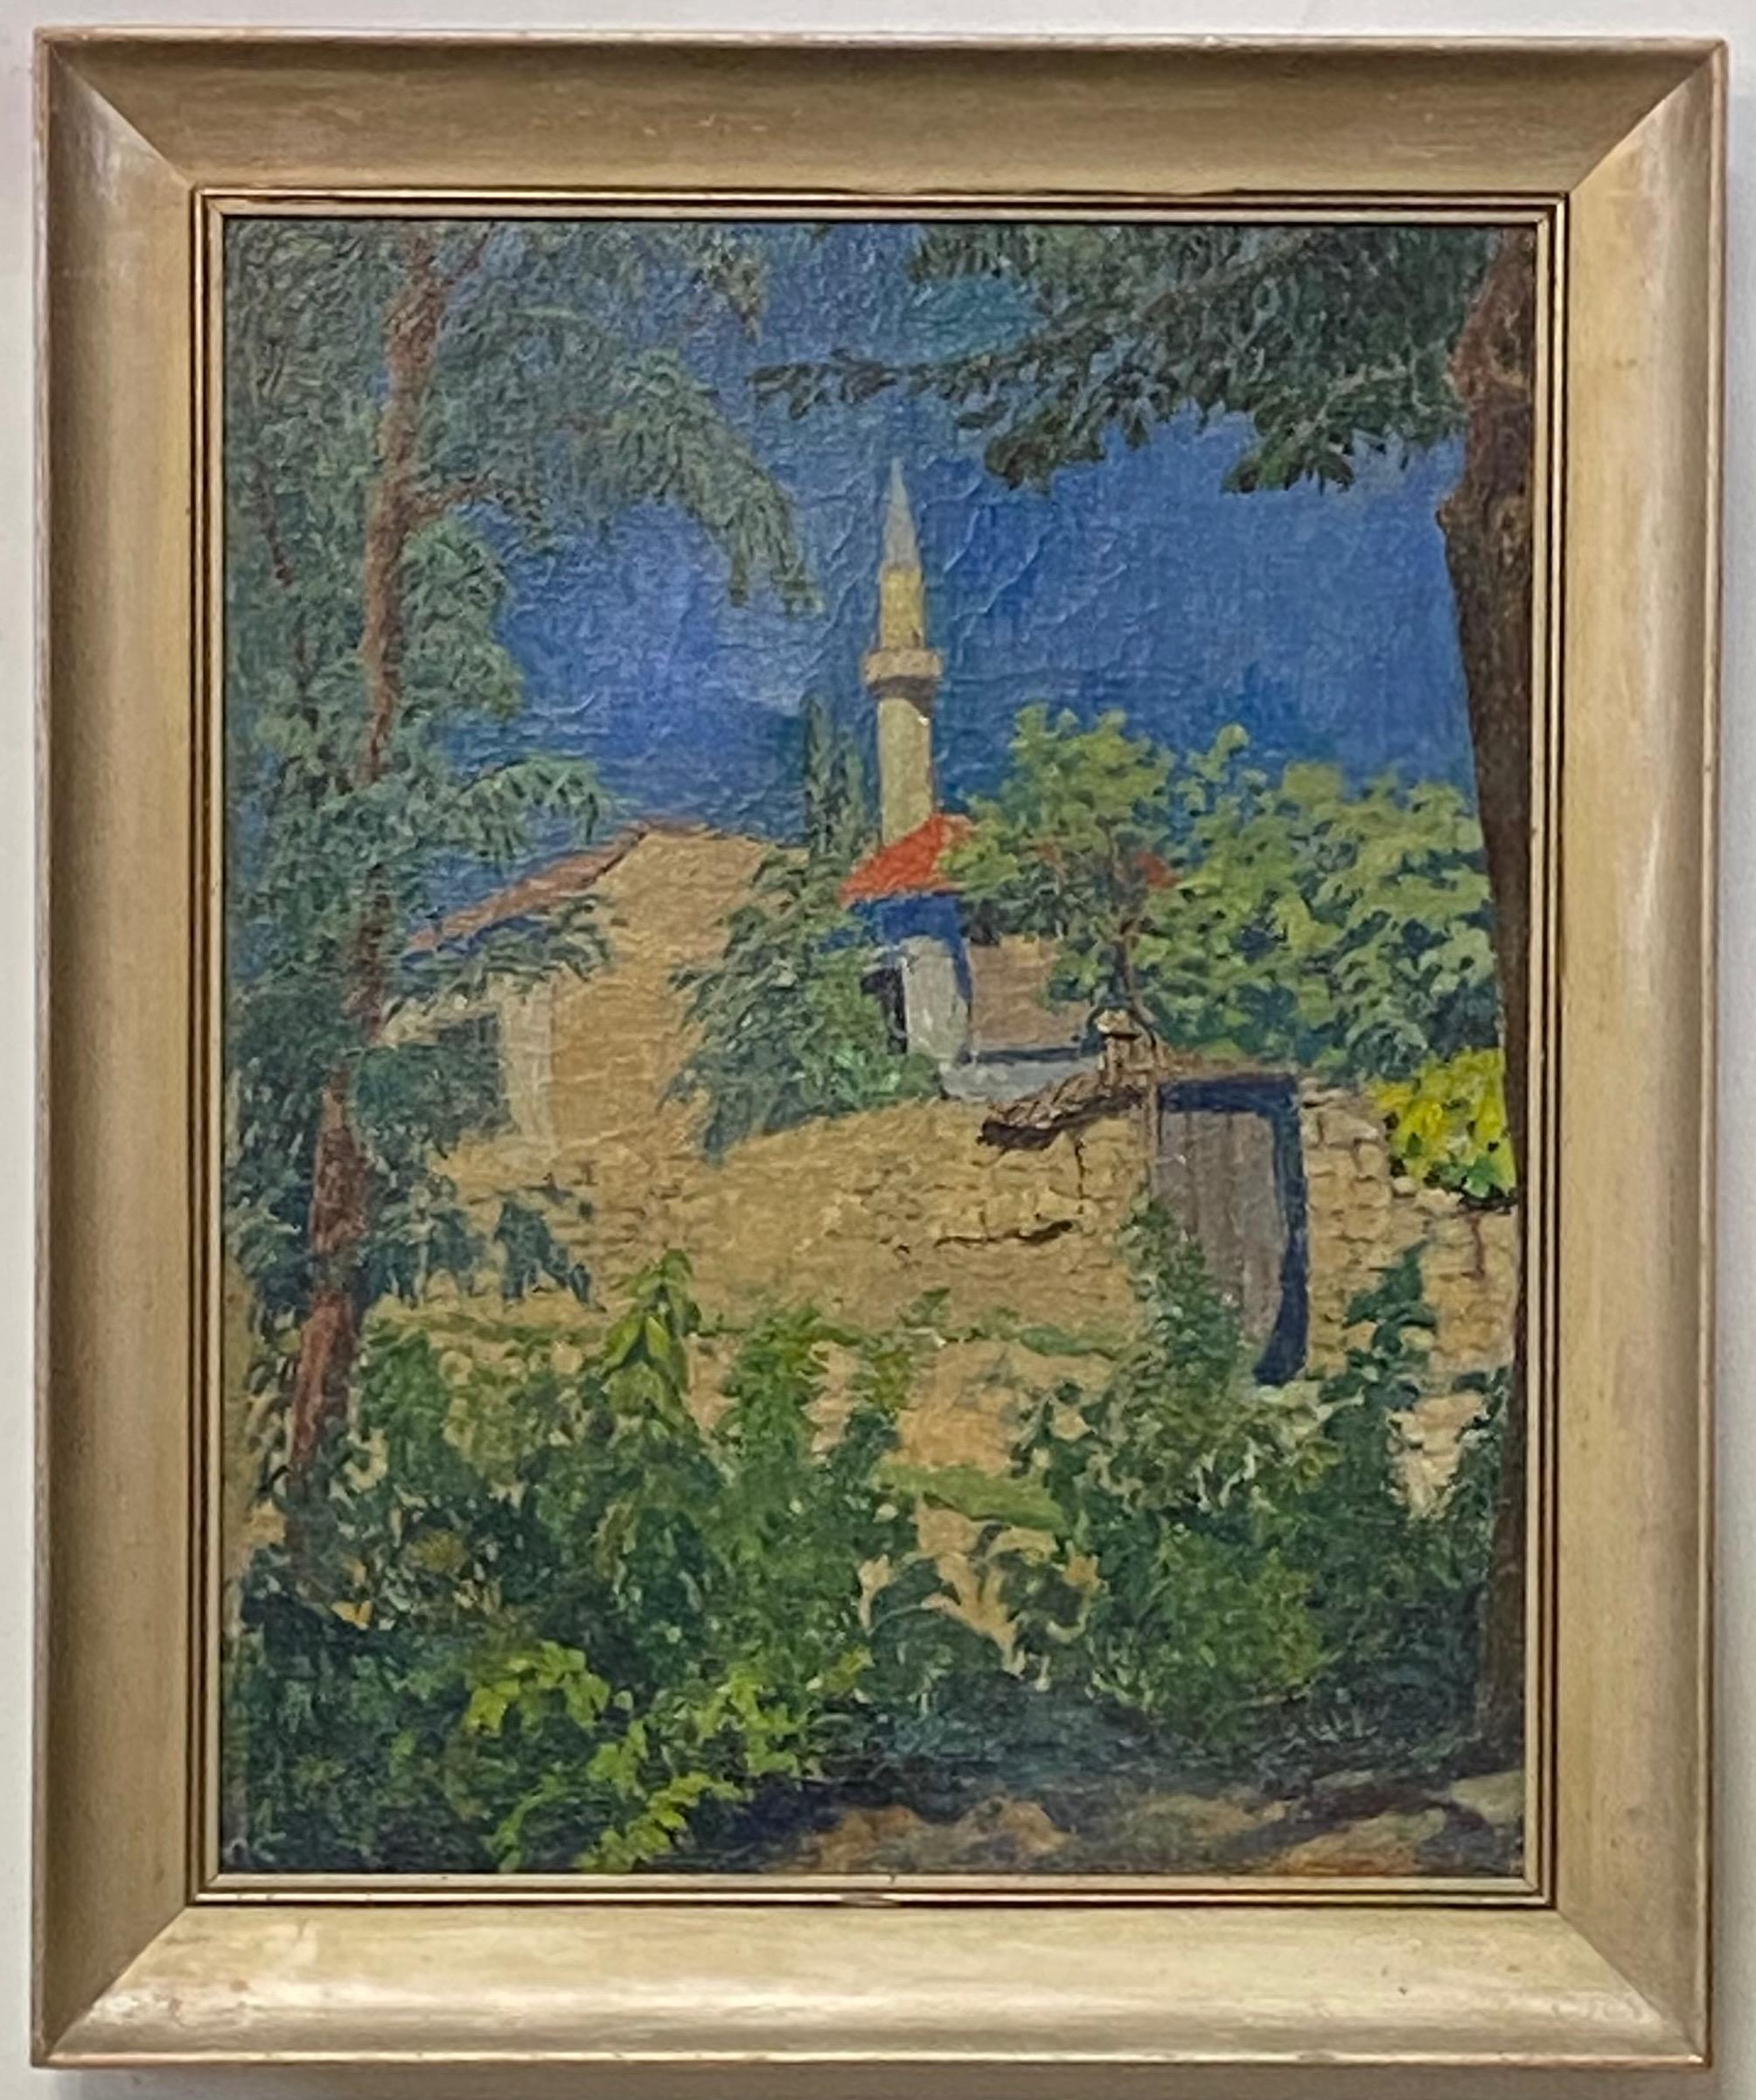 A beautifully painted landscape scene with a Turkish Minaret . 
Oil on canvas in wood frame, unsigned.
This painting has been re-lined and appears to have been reduced in size (possibly the reason there is not a signature).
Most likely painted by